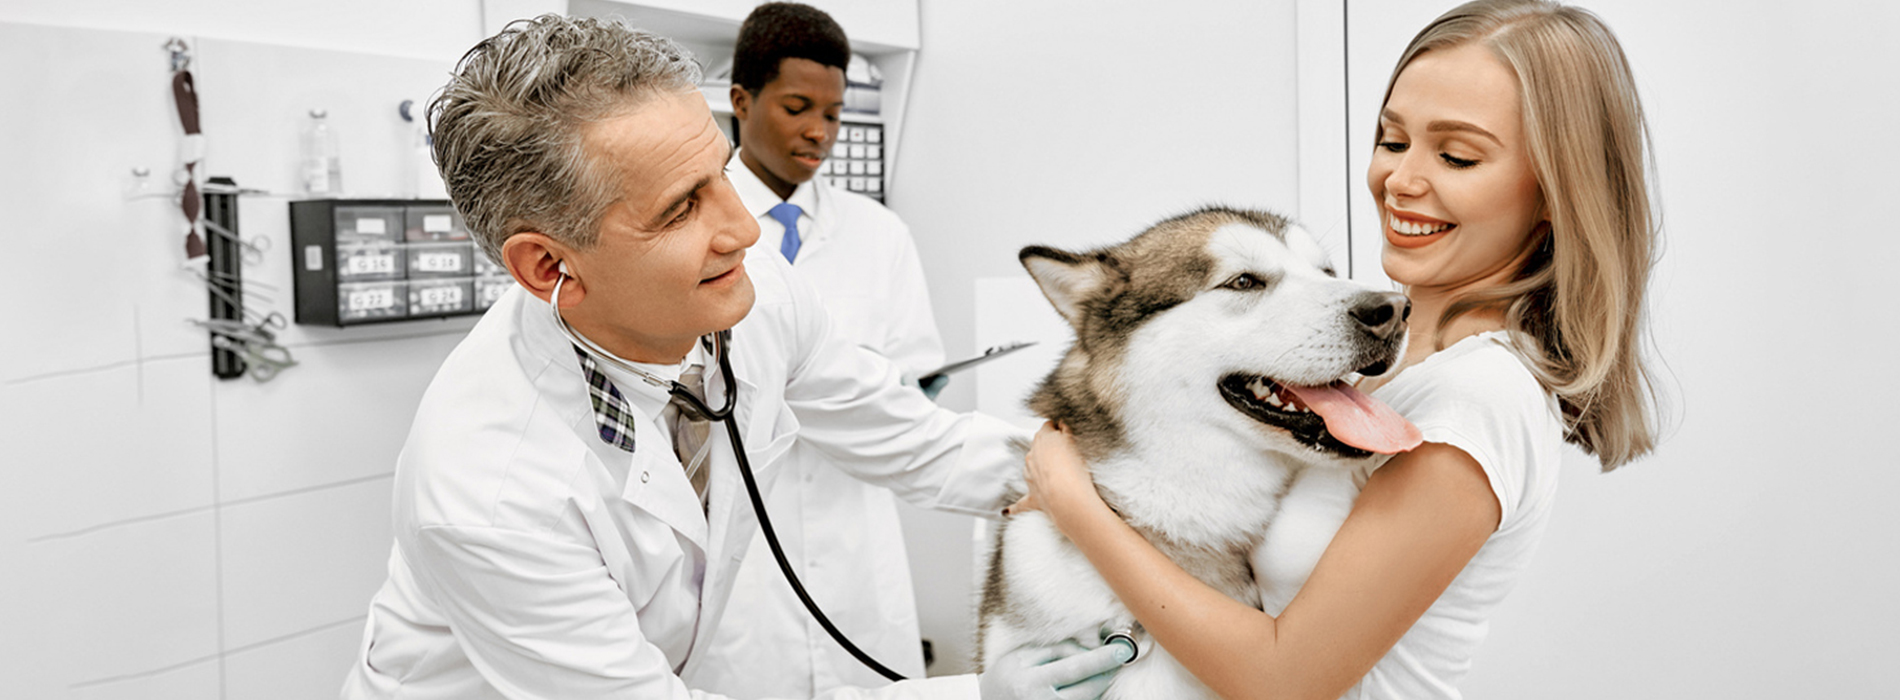 Veterinarian Clinic Fairview - Emergency Vet And Pet Clinic Near Me